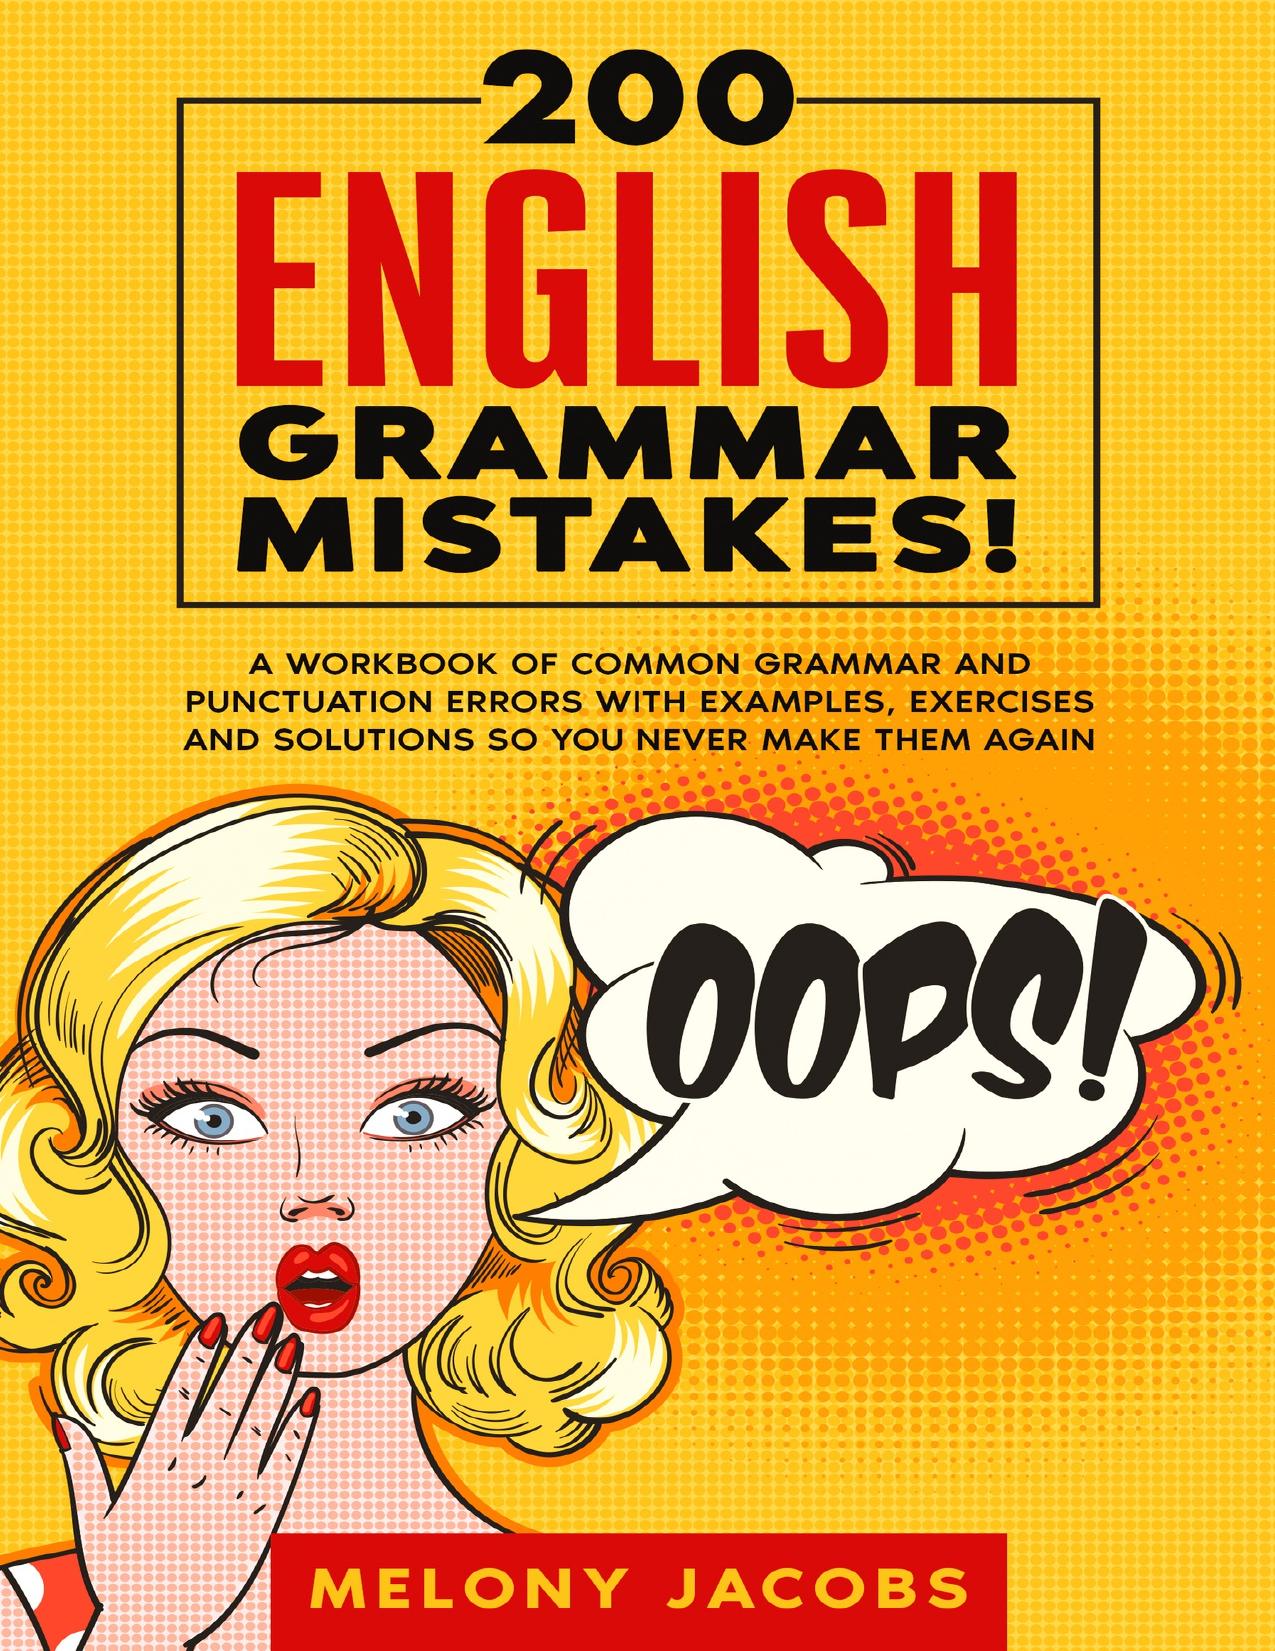 200 English Grammar Mistakes!: A Workbook of Common Grammar and Punctuation Errors with Examples, Exercises and Solutions So You Never Make Them Again by Jacobs Melony